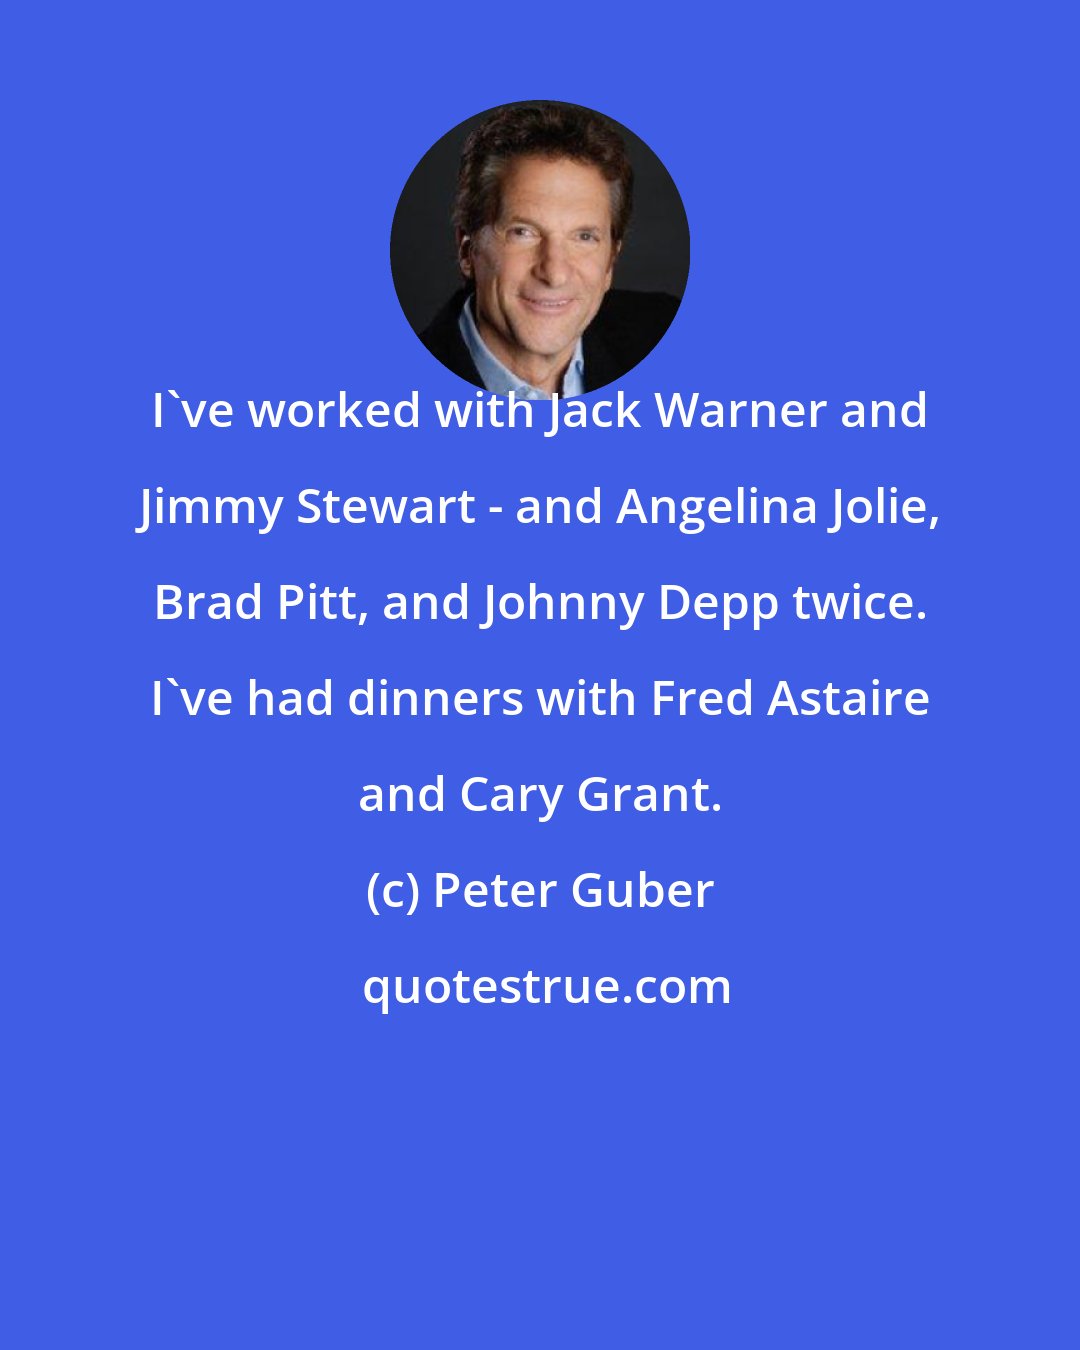 Peter Guber: I've worked with Jack Warner and Jimmy Stewart - and Angelina Jolie, Brad Pitt, and Johnny Depp twice. I've had dinners with Fred Astaire and Cary Grant.